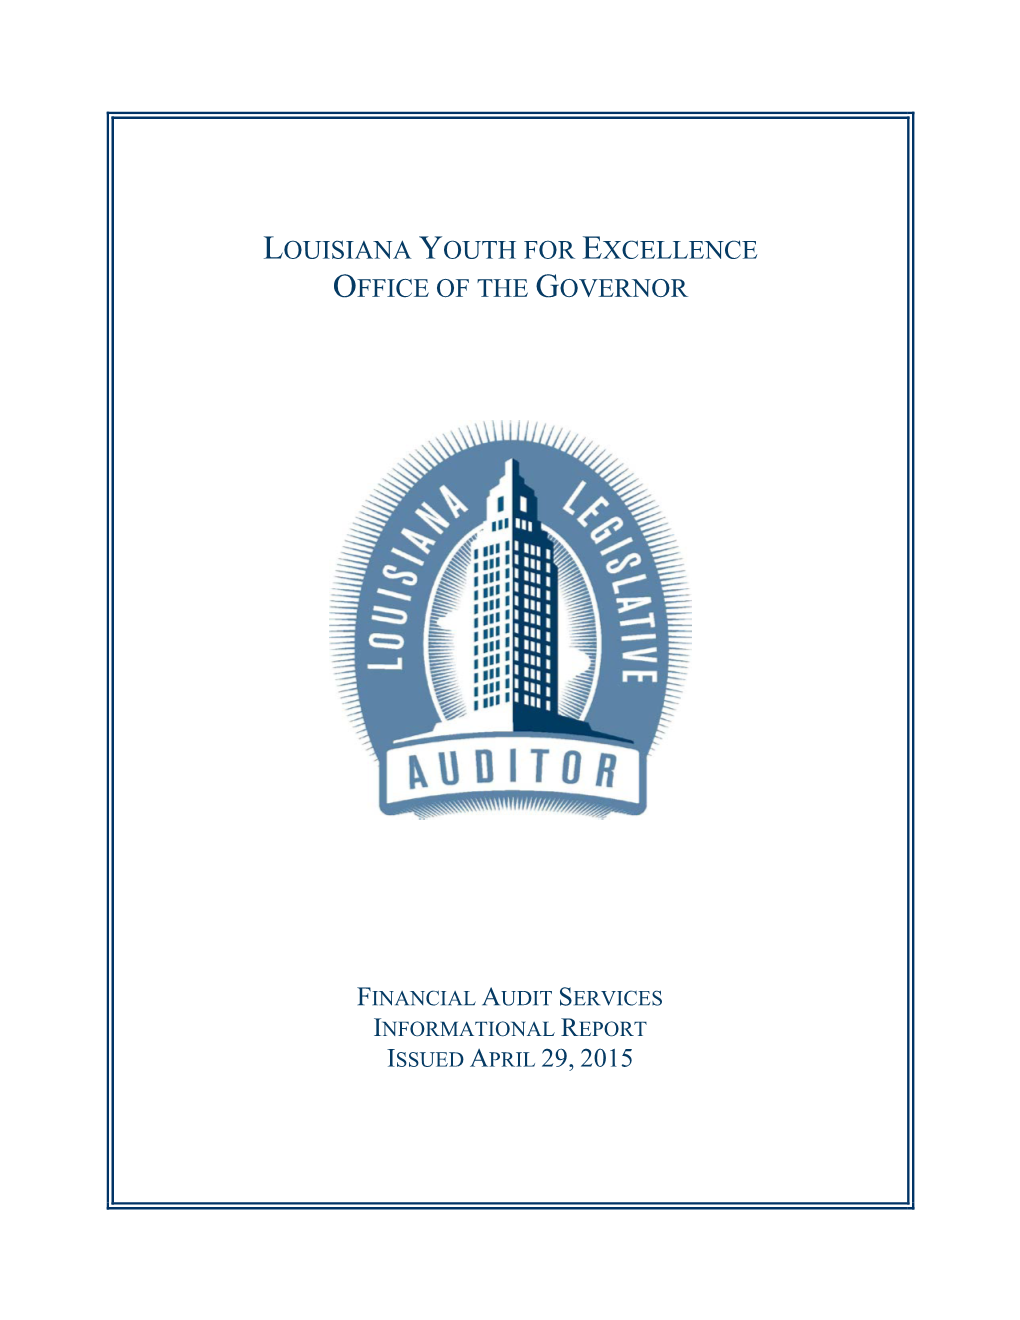 Louisiana Youth for Excellence Office of the Governor